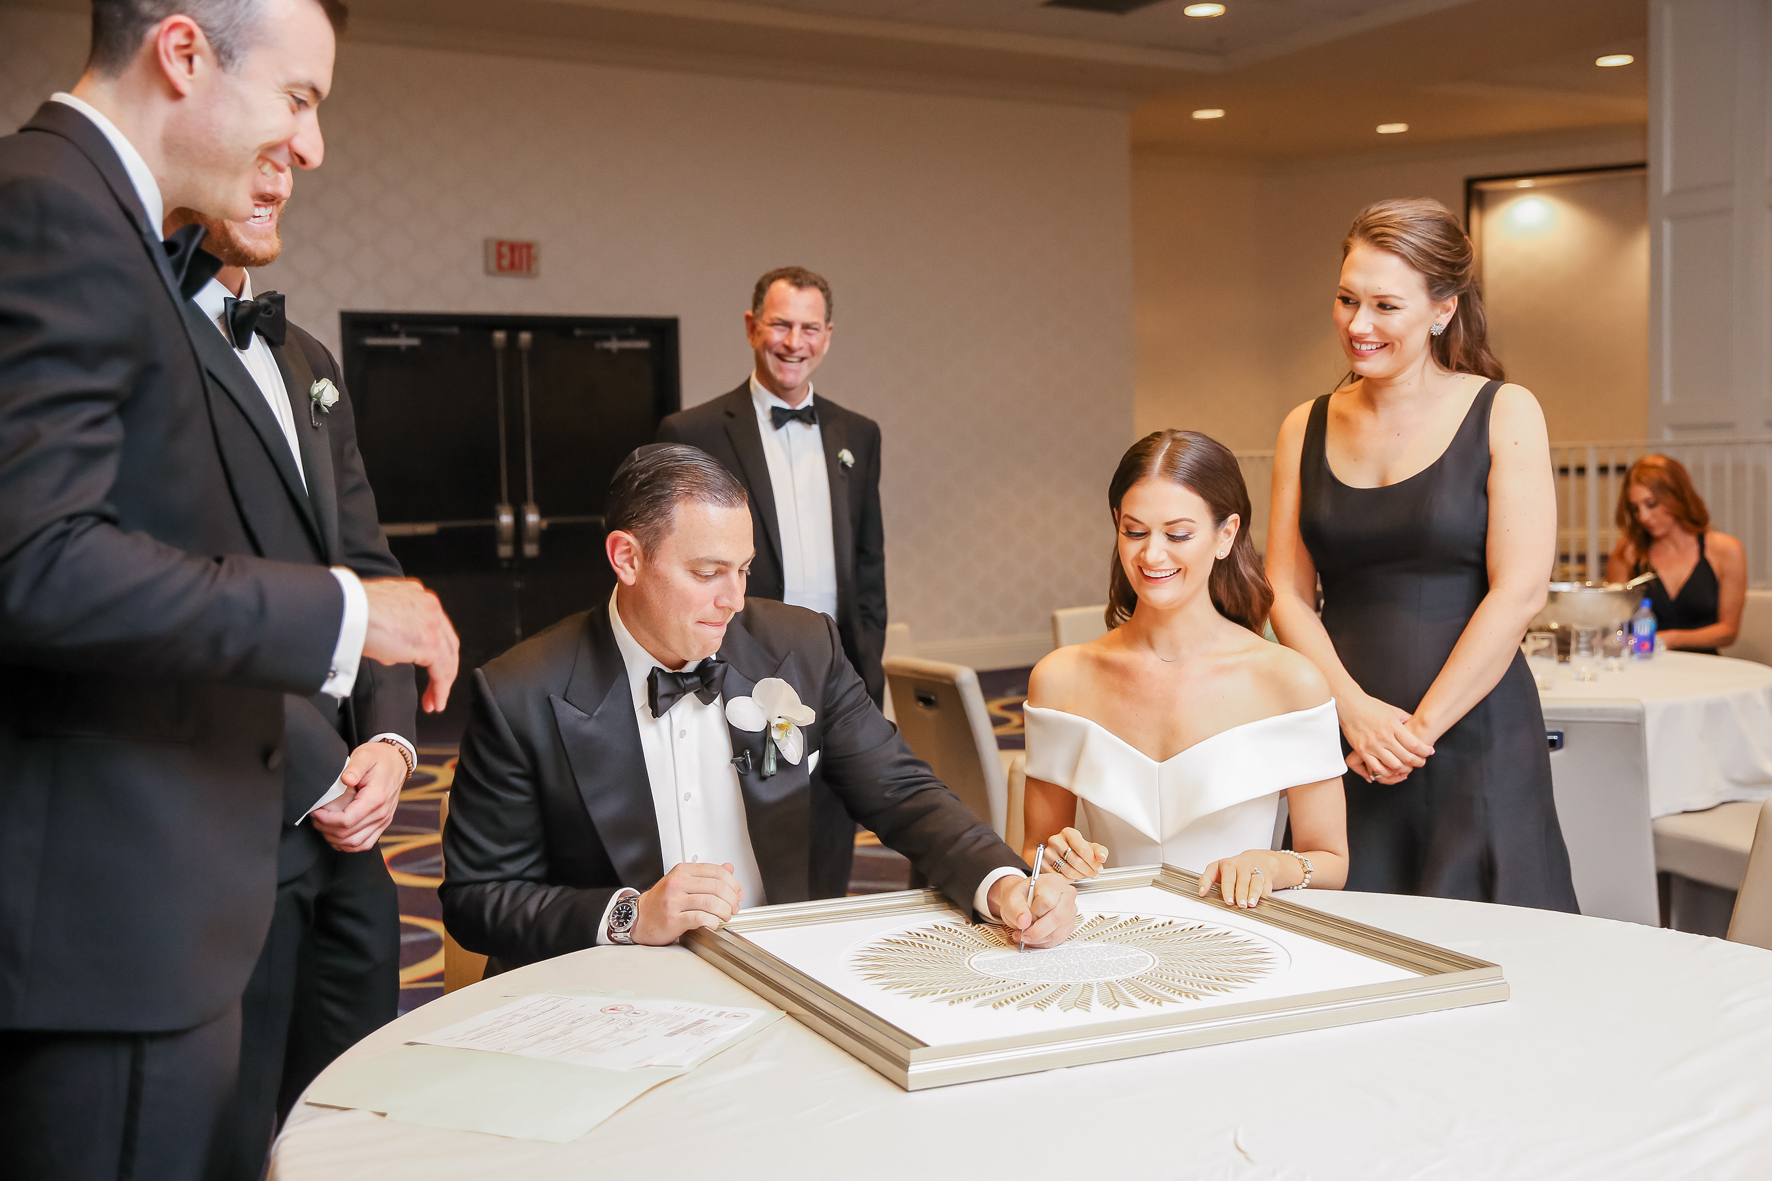 A collection of various Ketubah styles, showcasing the endless possibilities for customization